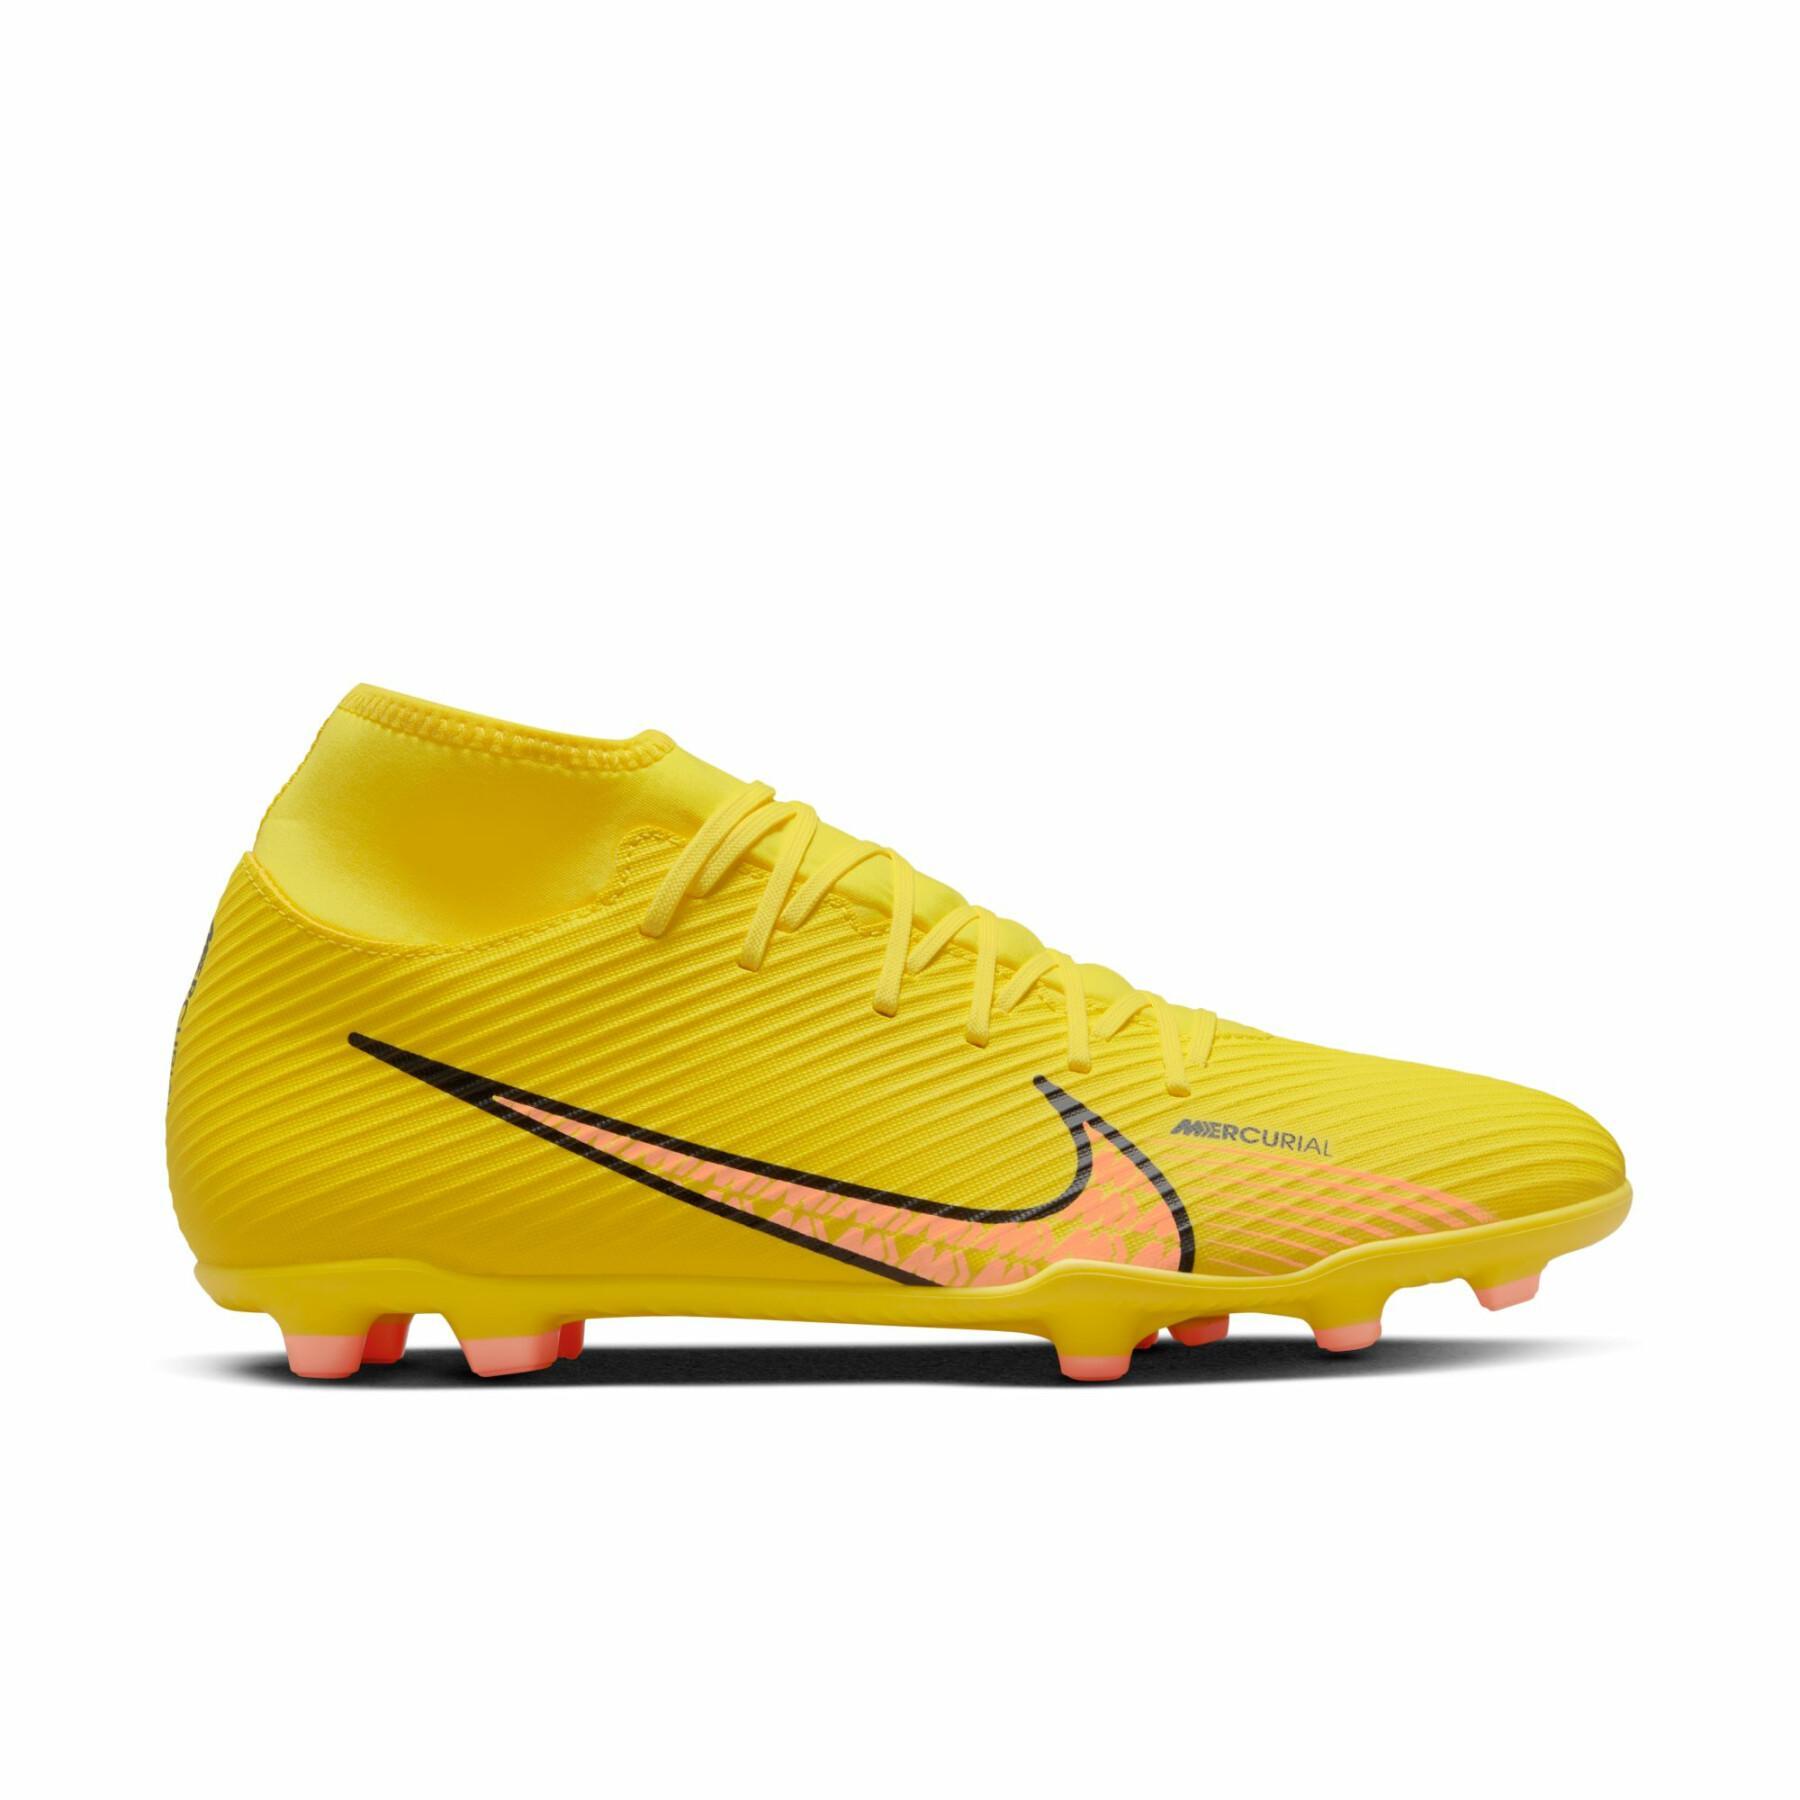 Chaussures de football Nike Mercurial Superfly 9 Club MG - Lucent Pack